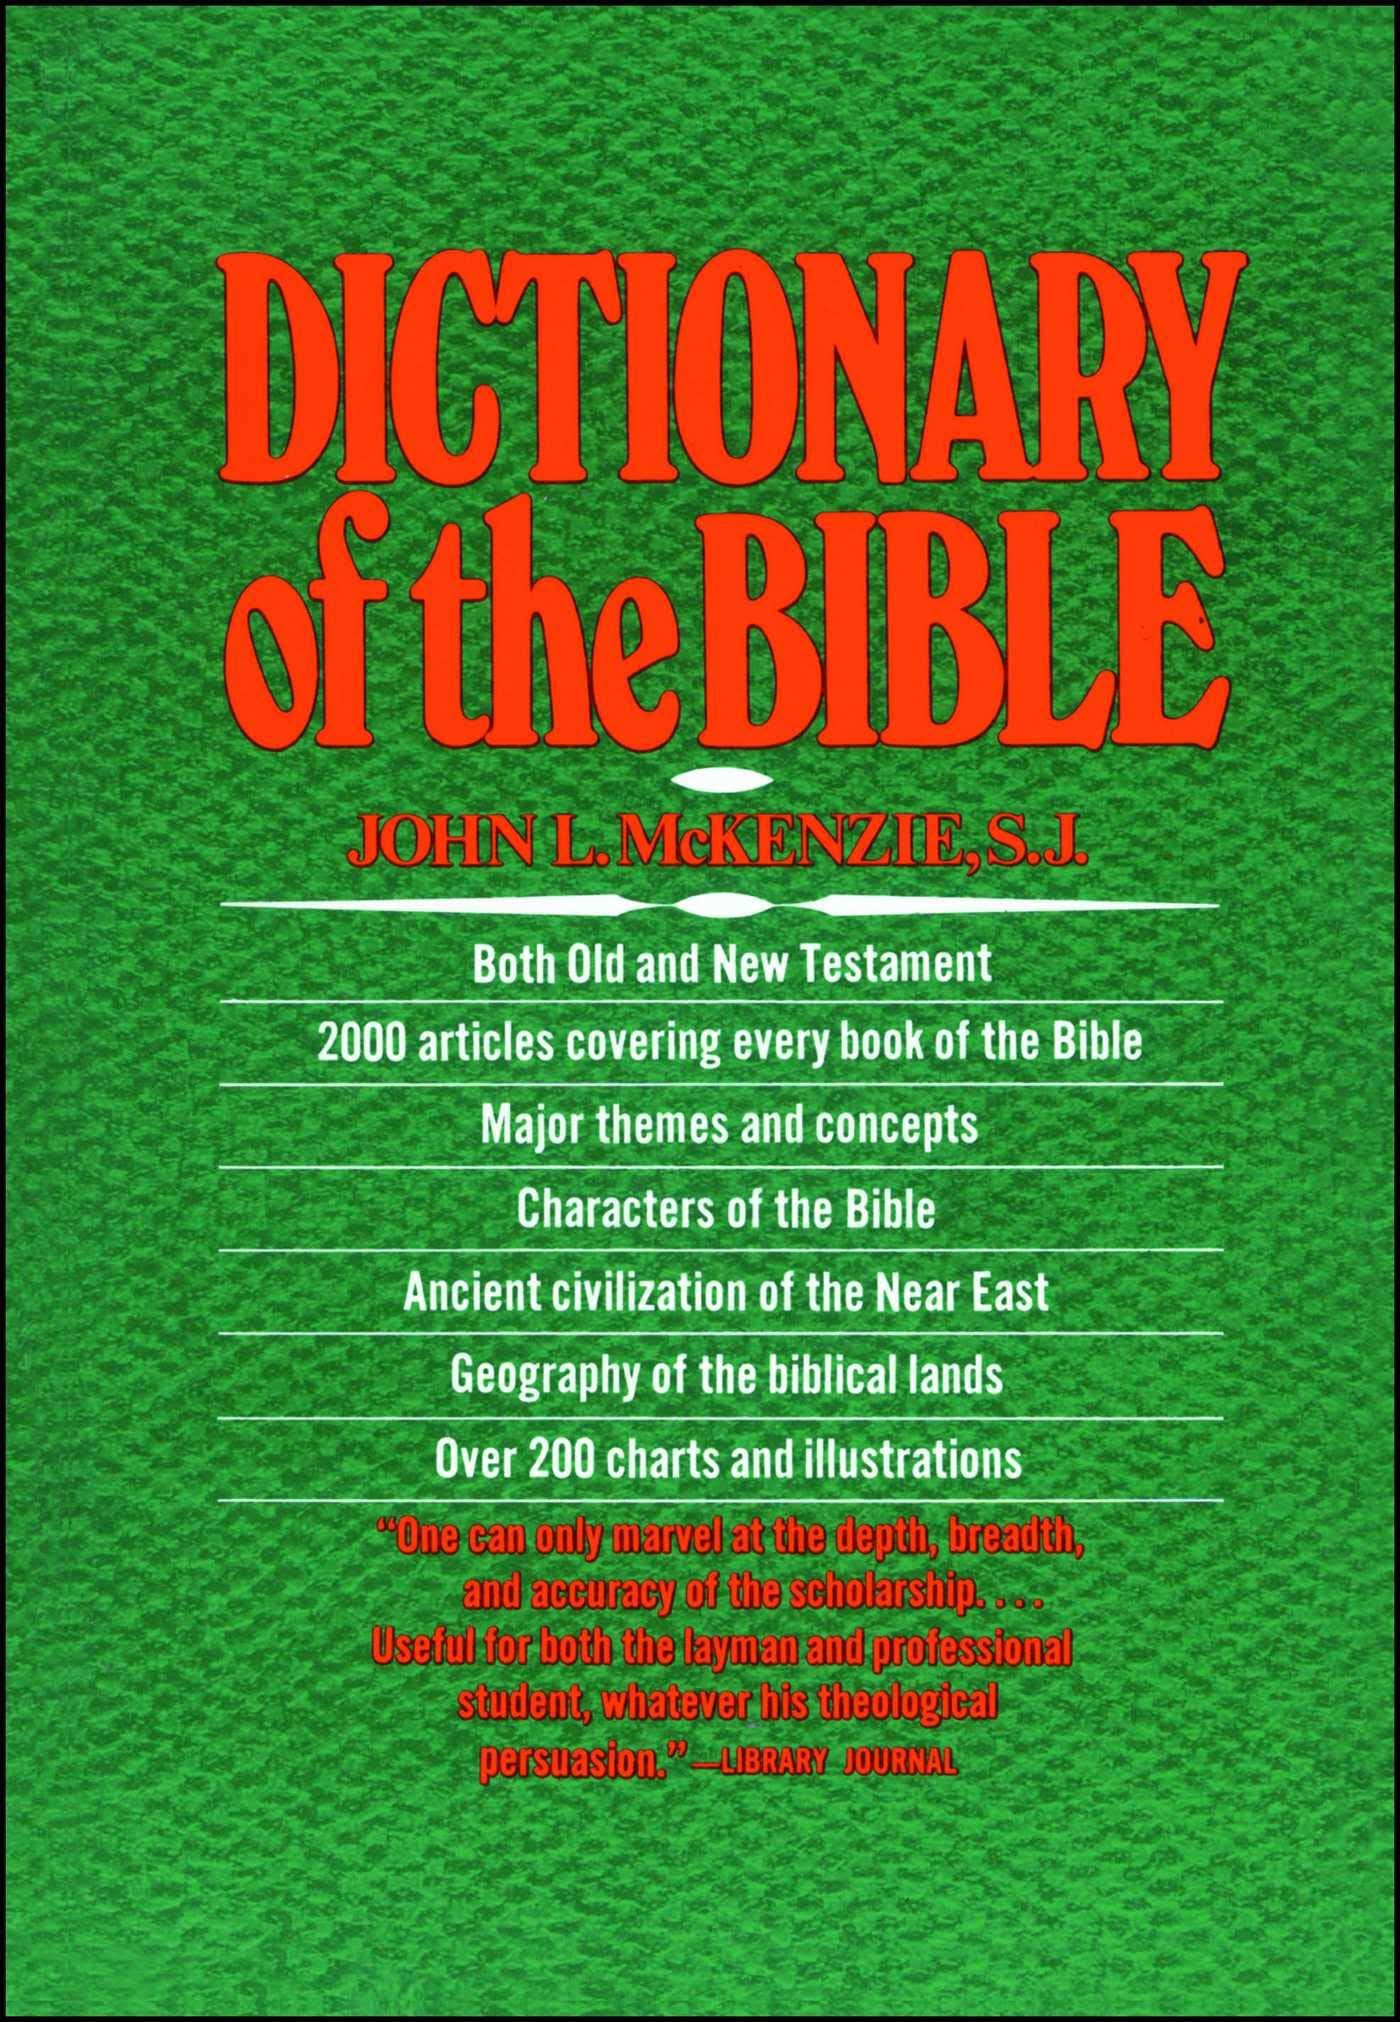 The Dictionary Of The Bible [Book]